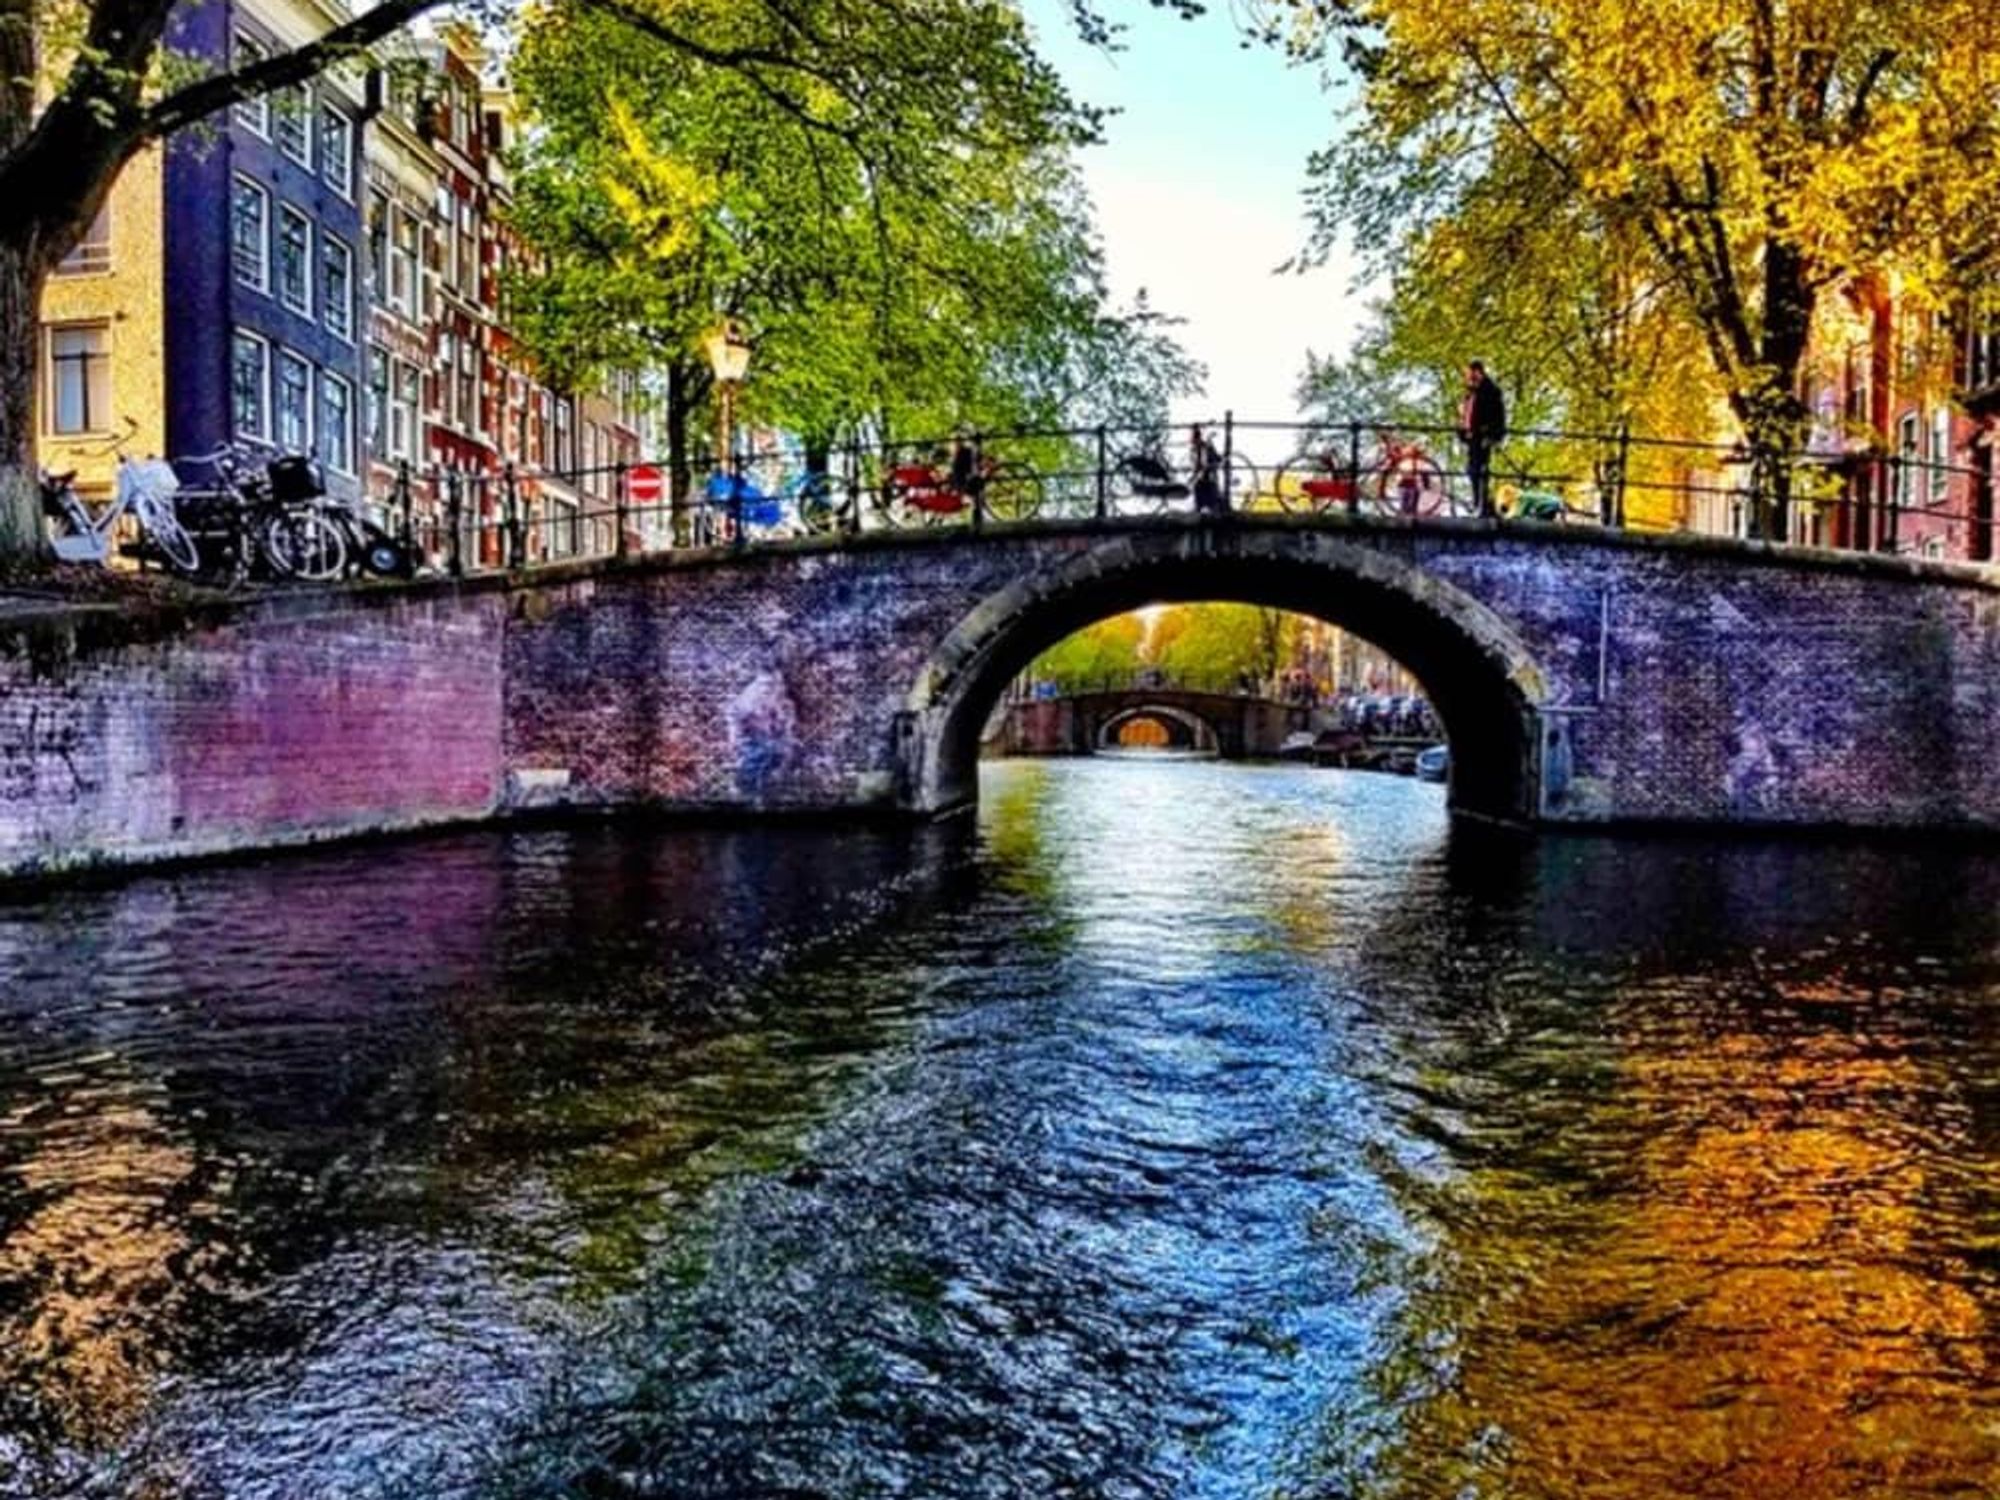 One of the many canals of Amsterdam